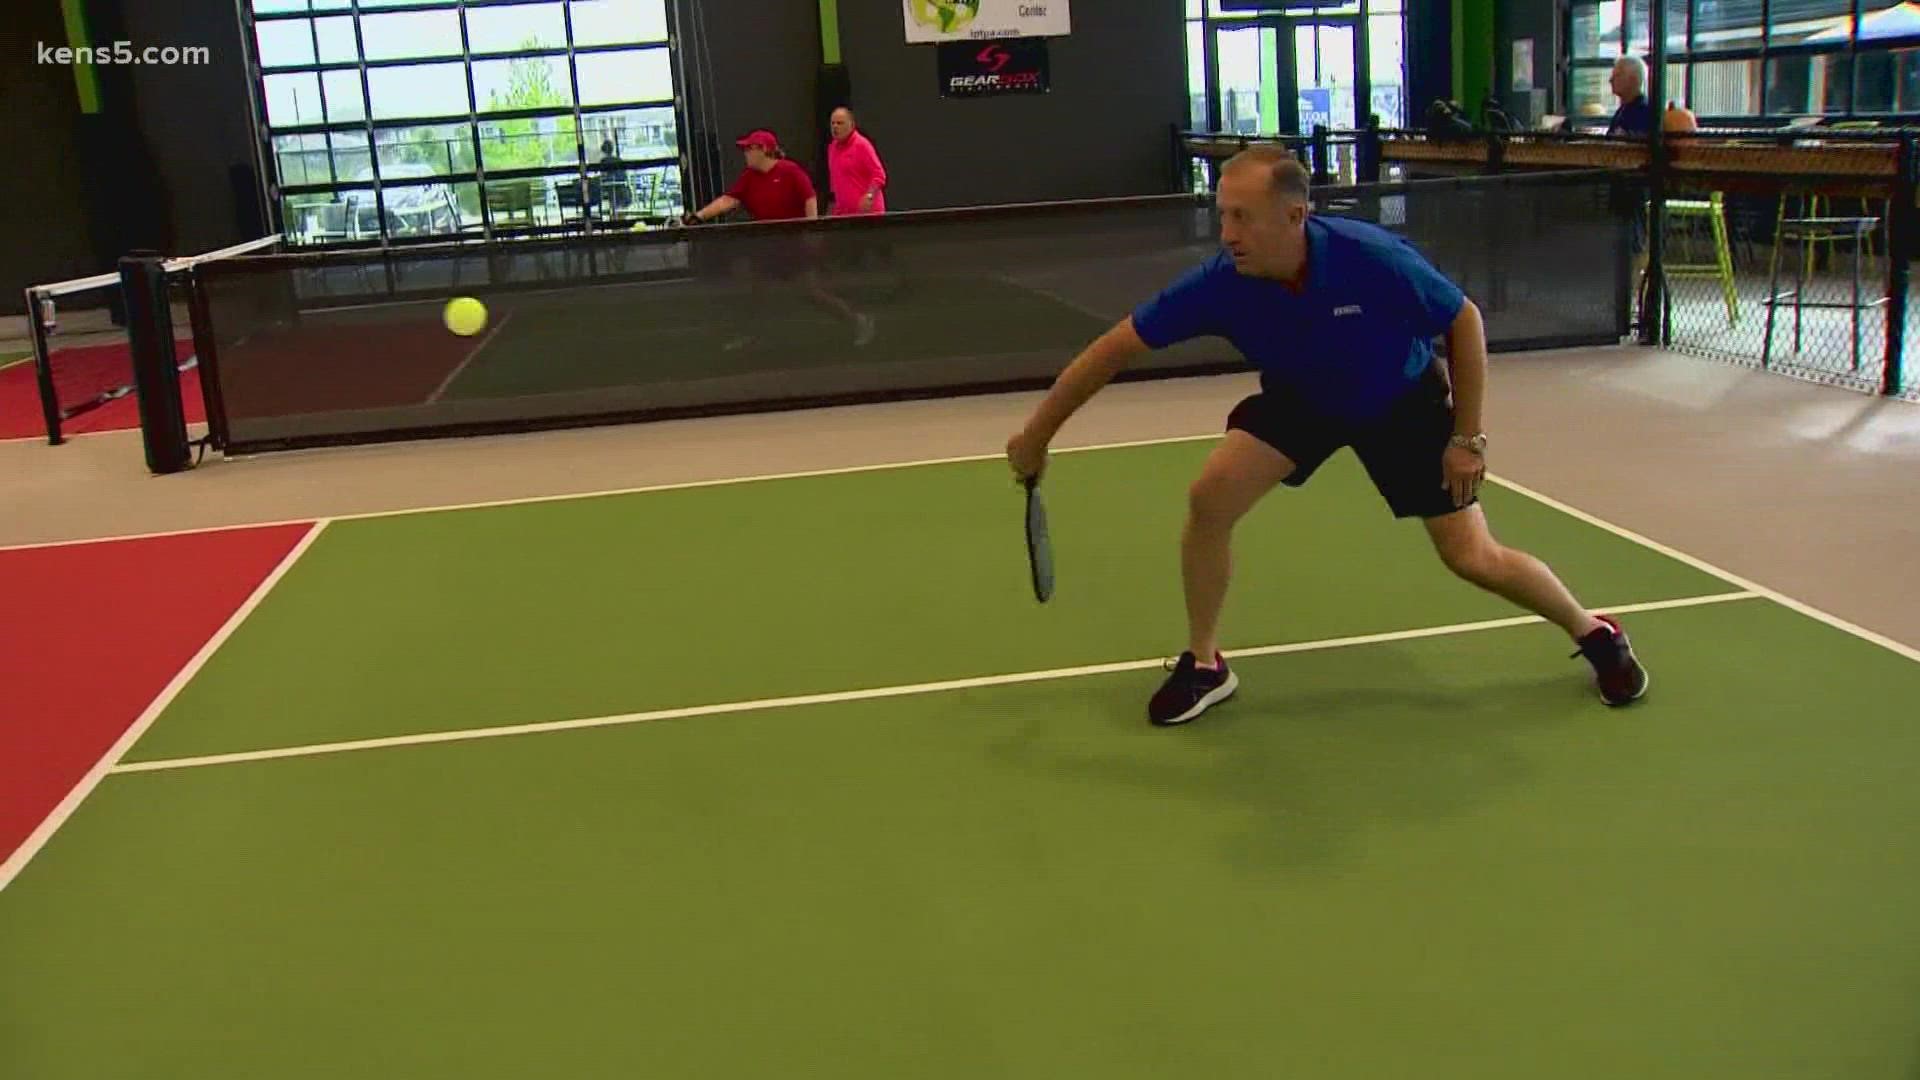 The first time you pick up a paddle and whack that ball across the net, you may find yourself hooked on Pickleball!